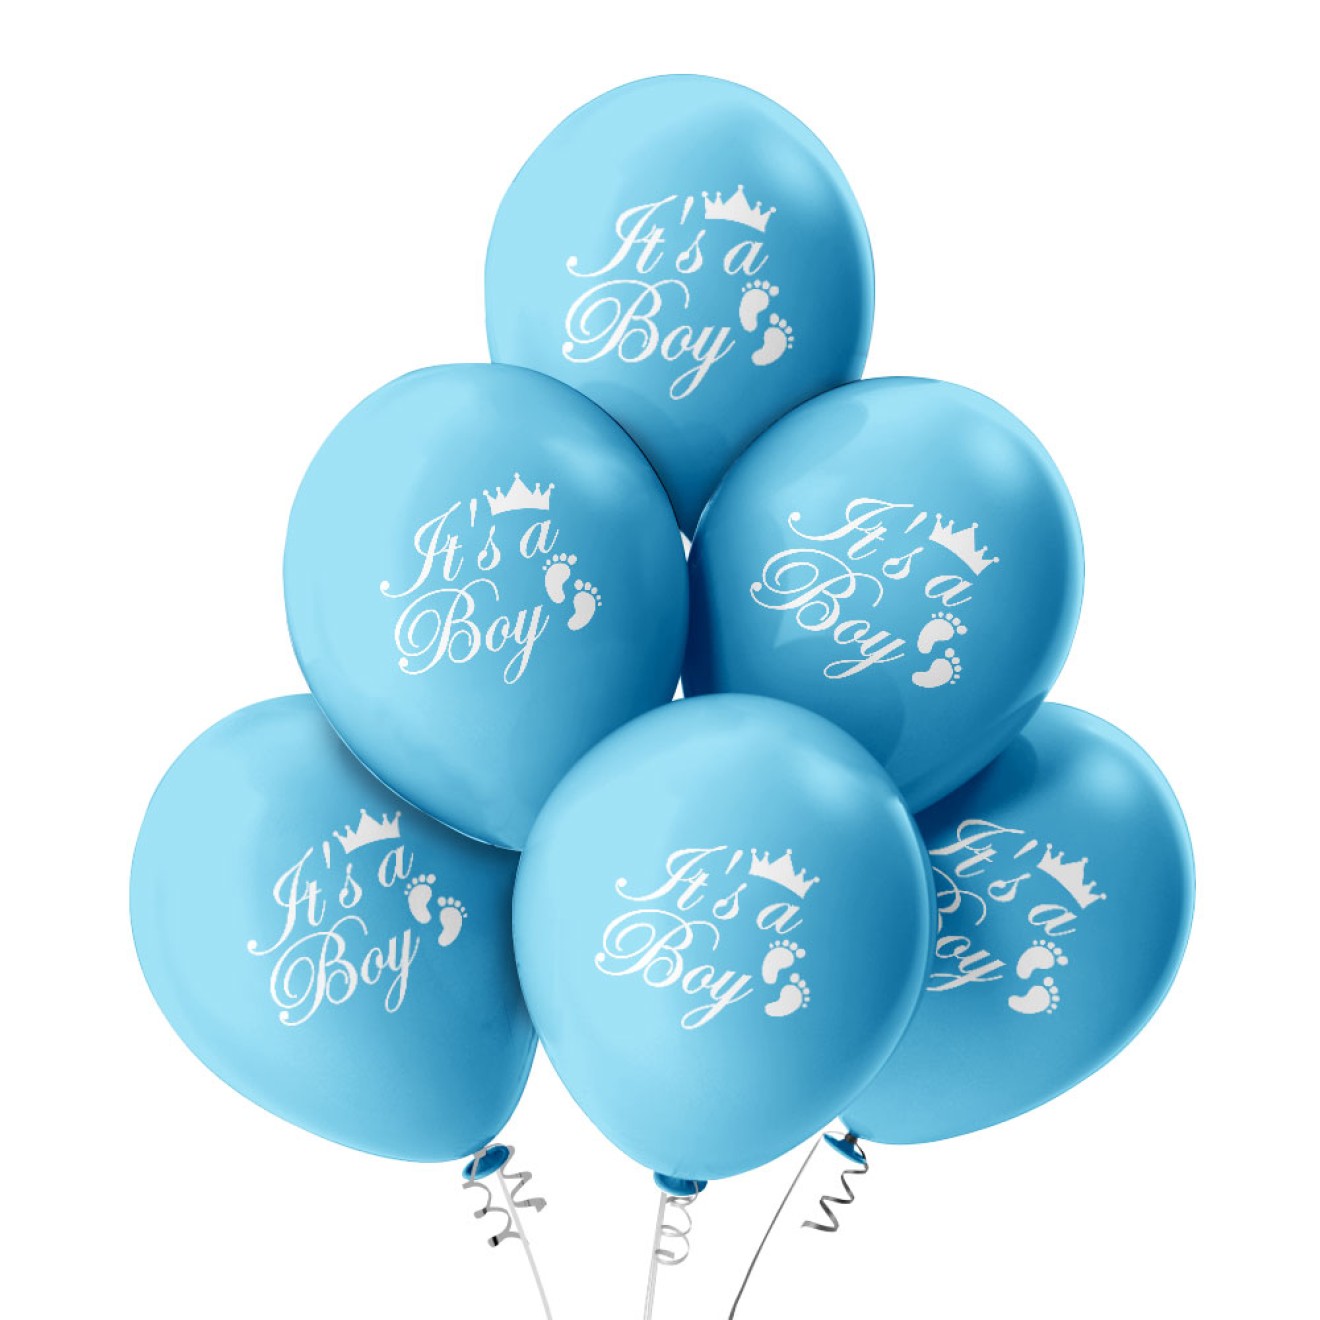 Luftballons Babyparty: It's A Boy - Freie Farbwahl